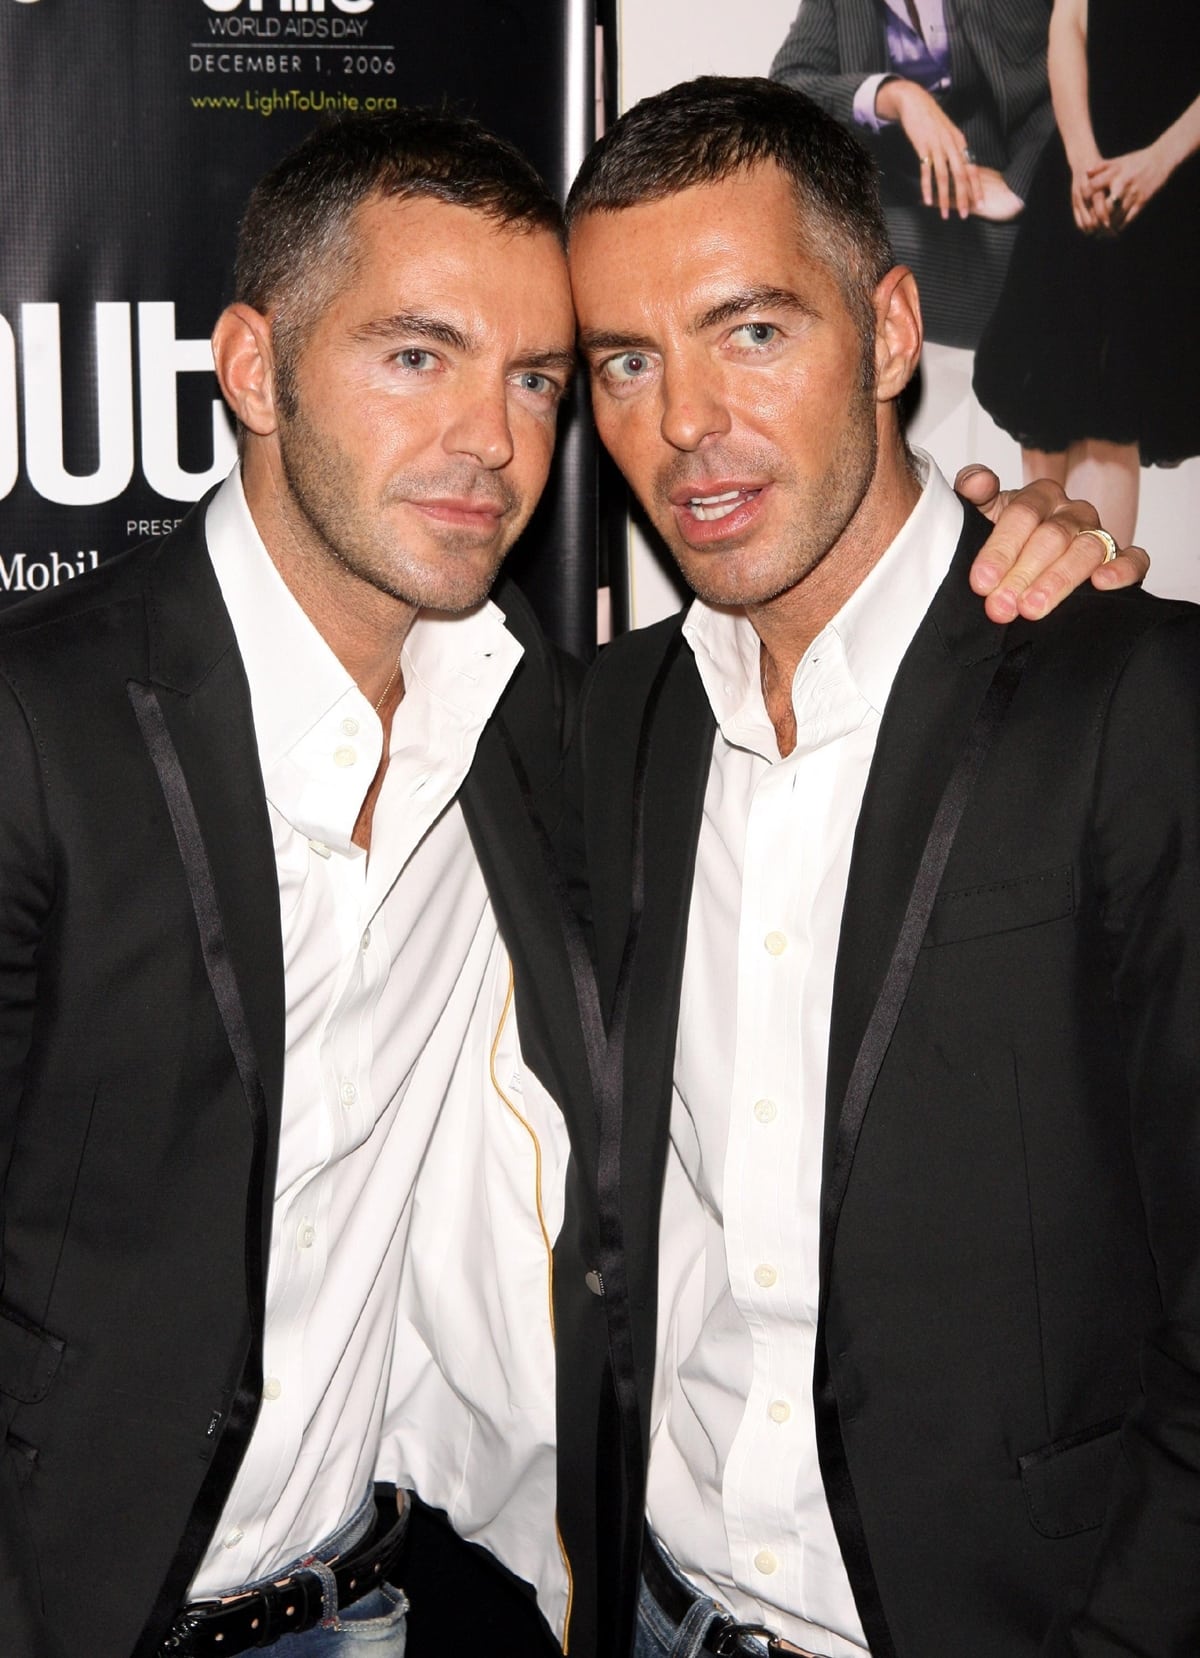 Designers Dean and Dan Caten of Dsquared² at Out Magazine honors 100 most influential people in gay culture at Out 100 Awards